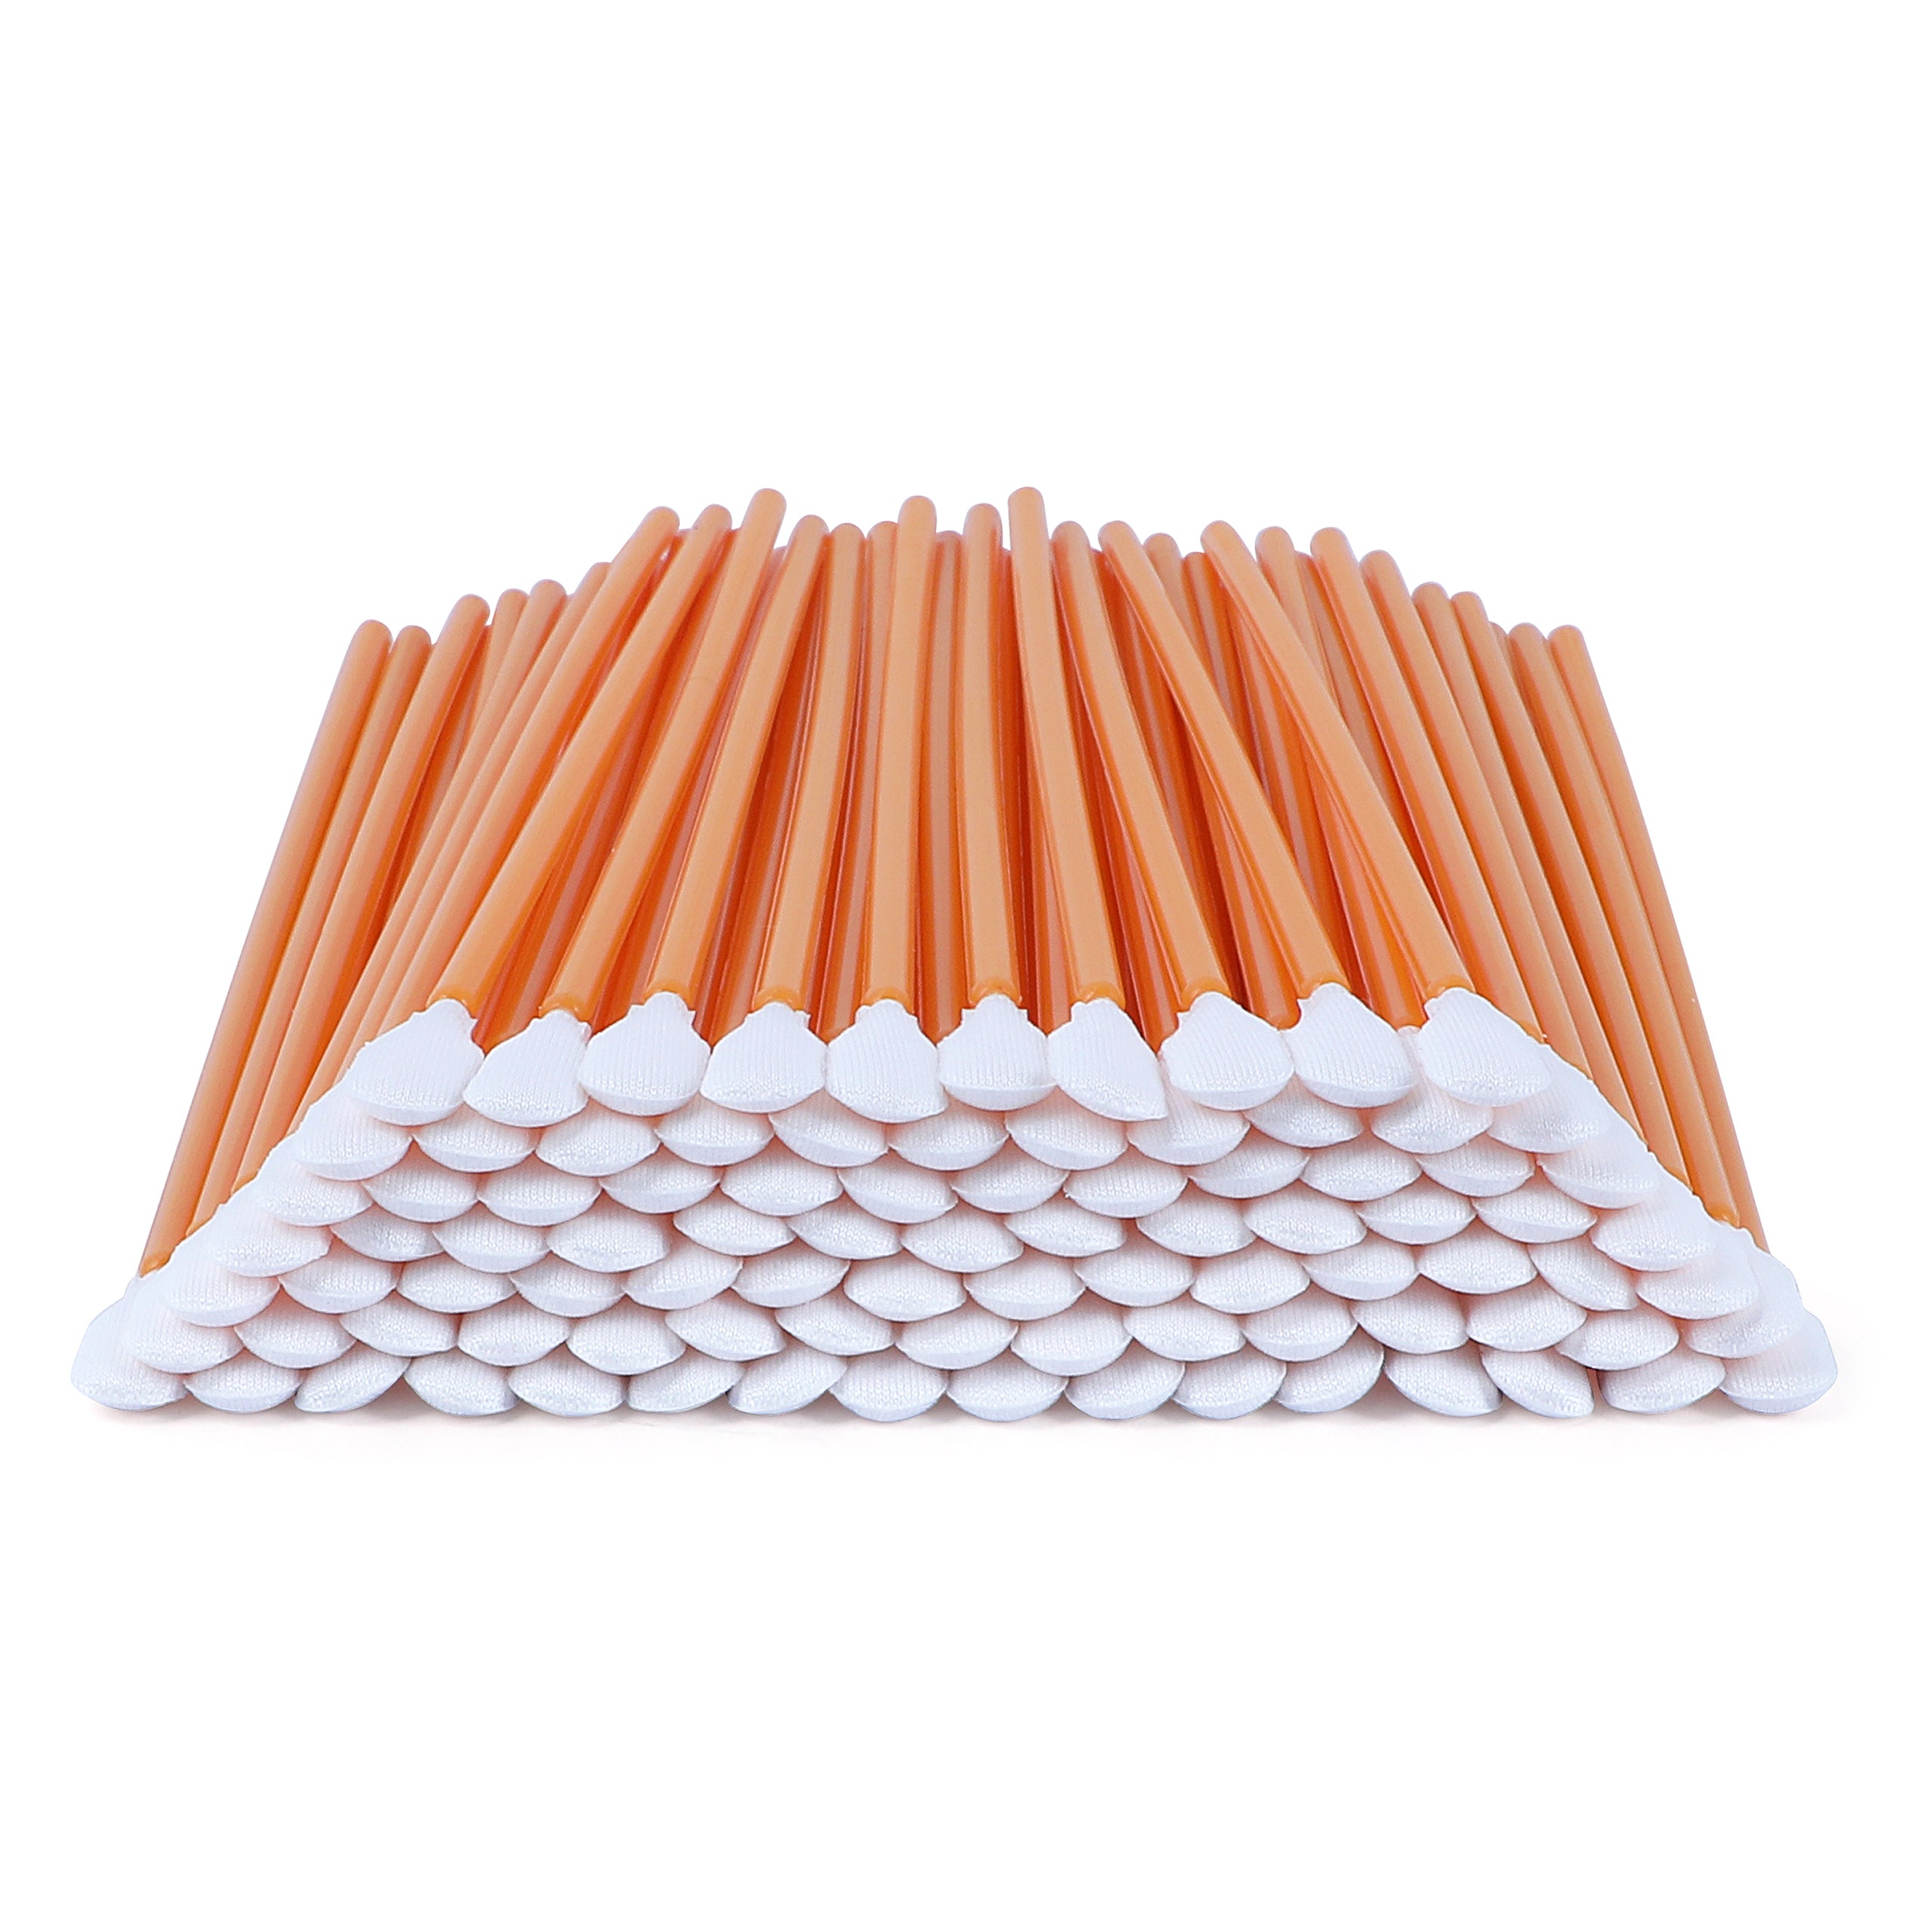 4" Cleaning Swabs (1,000 pcs, Orange, Length/Swab Head Width=100 mm/6.8 mm) Knitted Polyester Cleanroom Foam Cleaning Swab Stick for Cleaning Optical Equipment (A7147A)